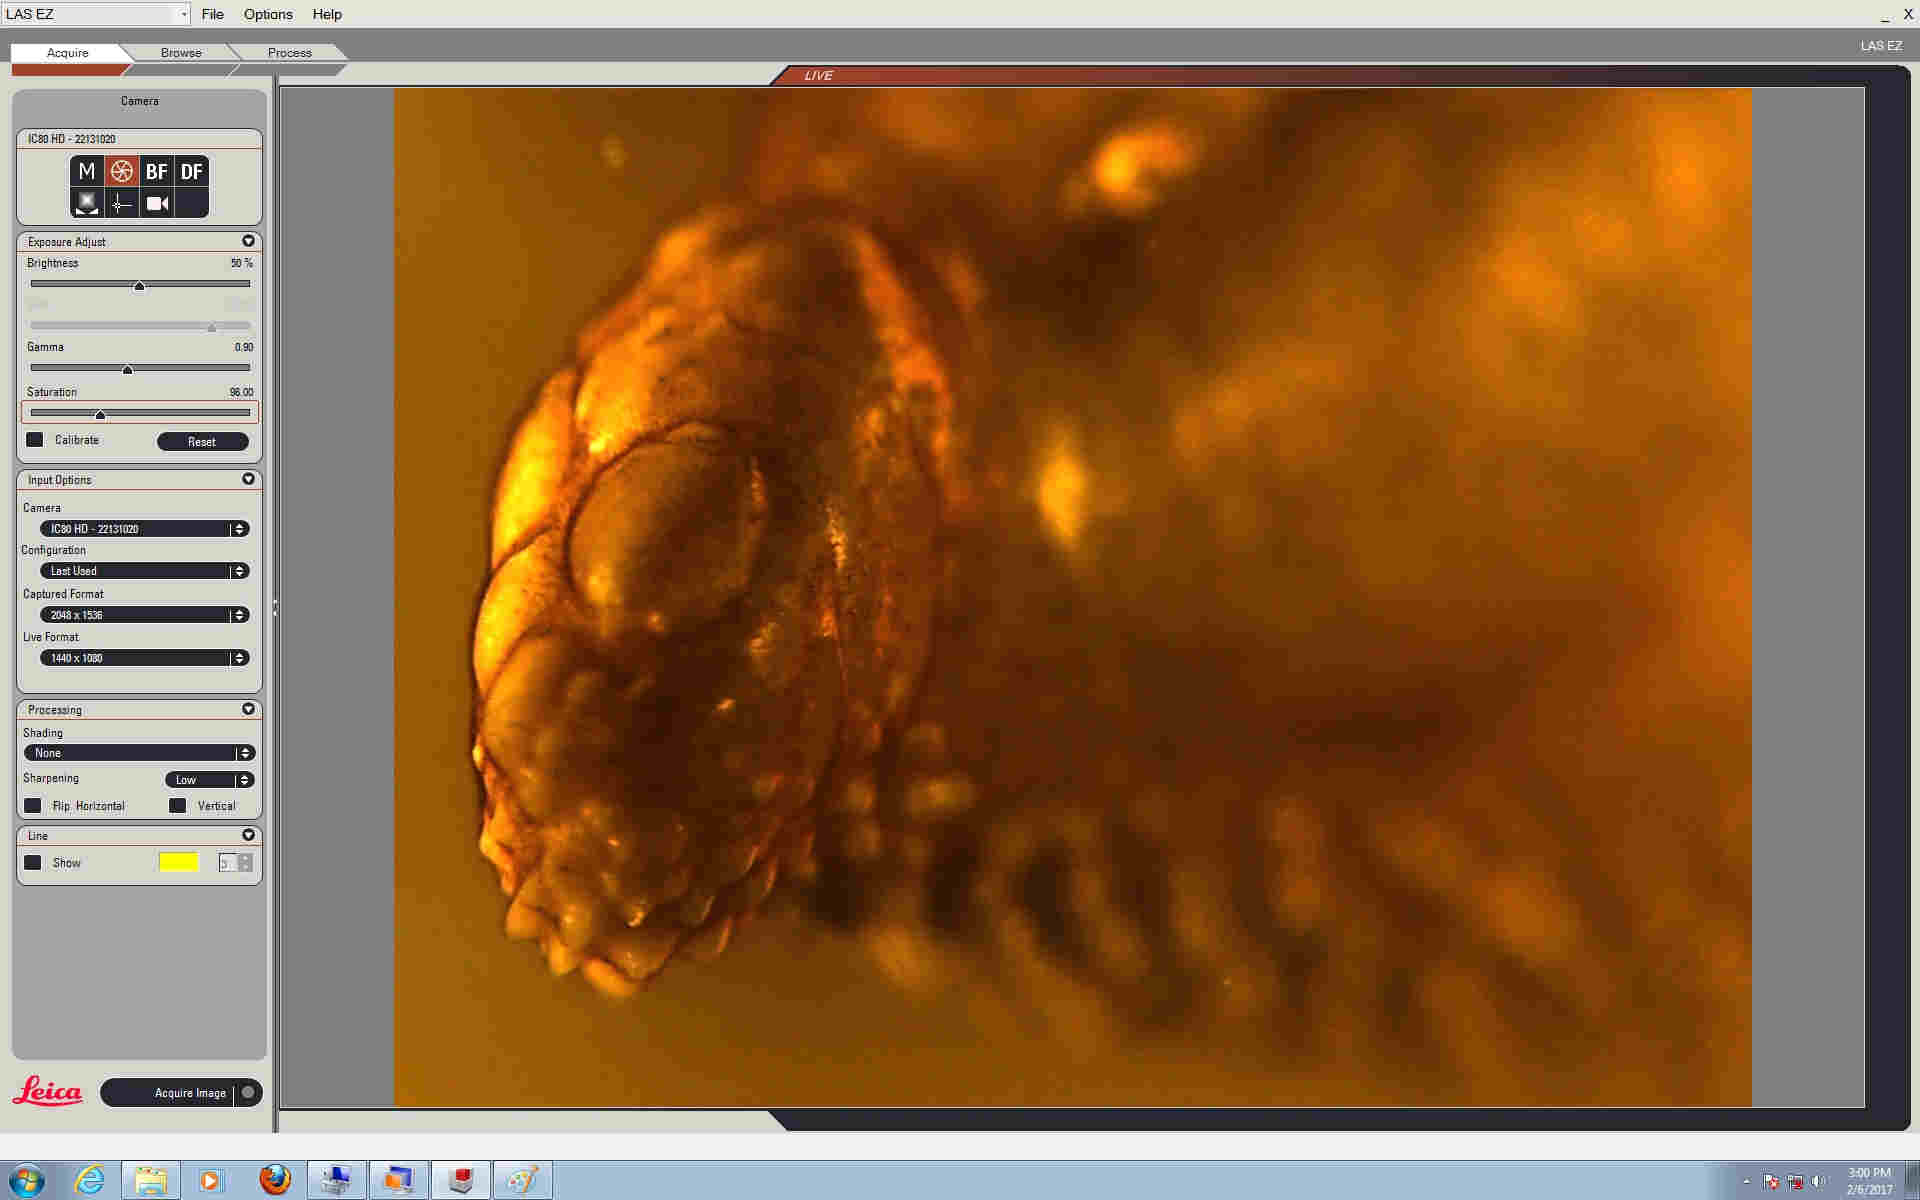 Leech in amber offers chance of discovering dinosaur blood